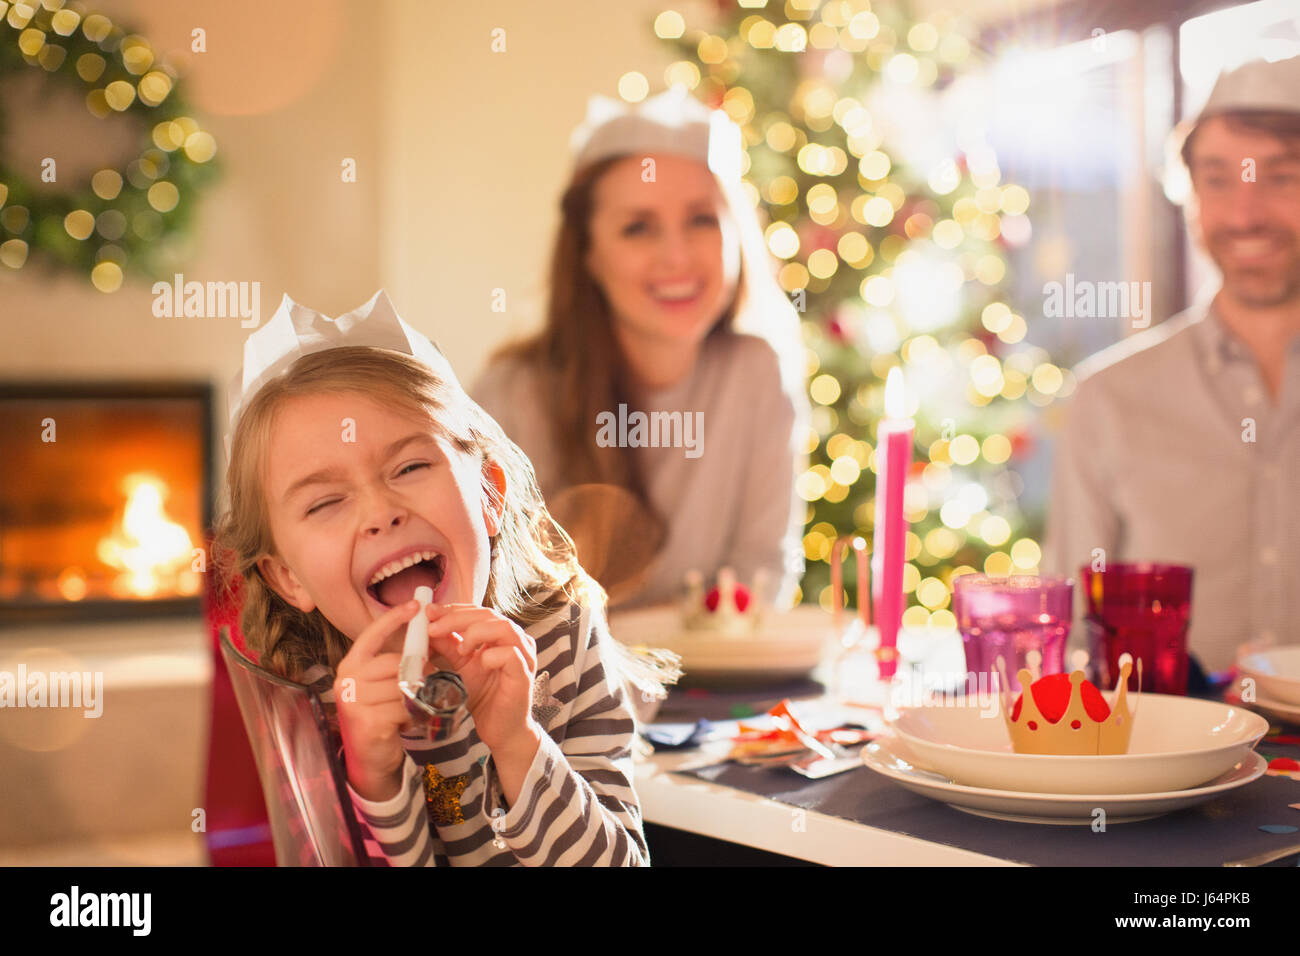 Portrait playful girl in paper crown blowing party favor at Christmas dinner table Stock Photo